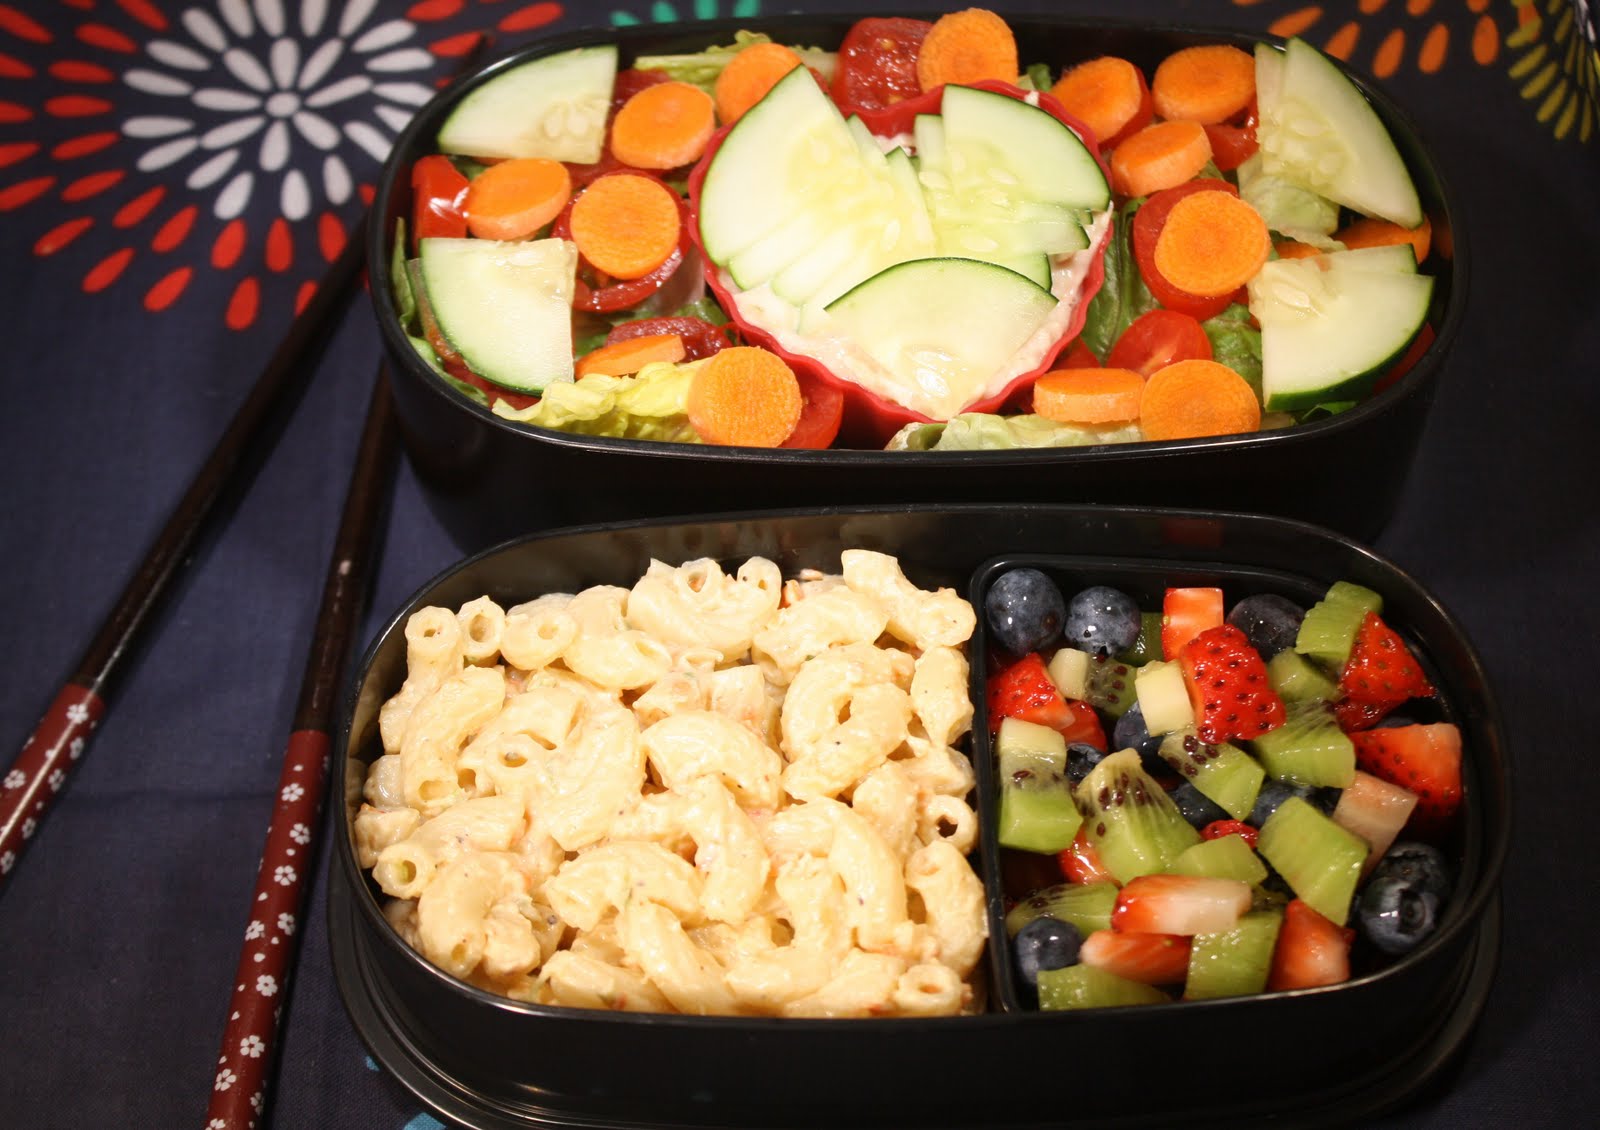 An American in Bento